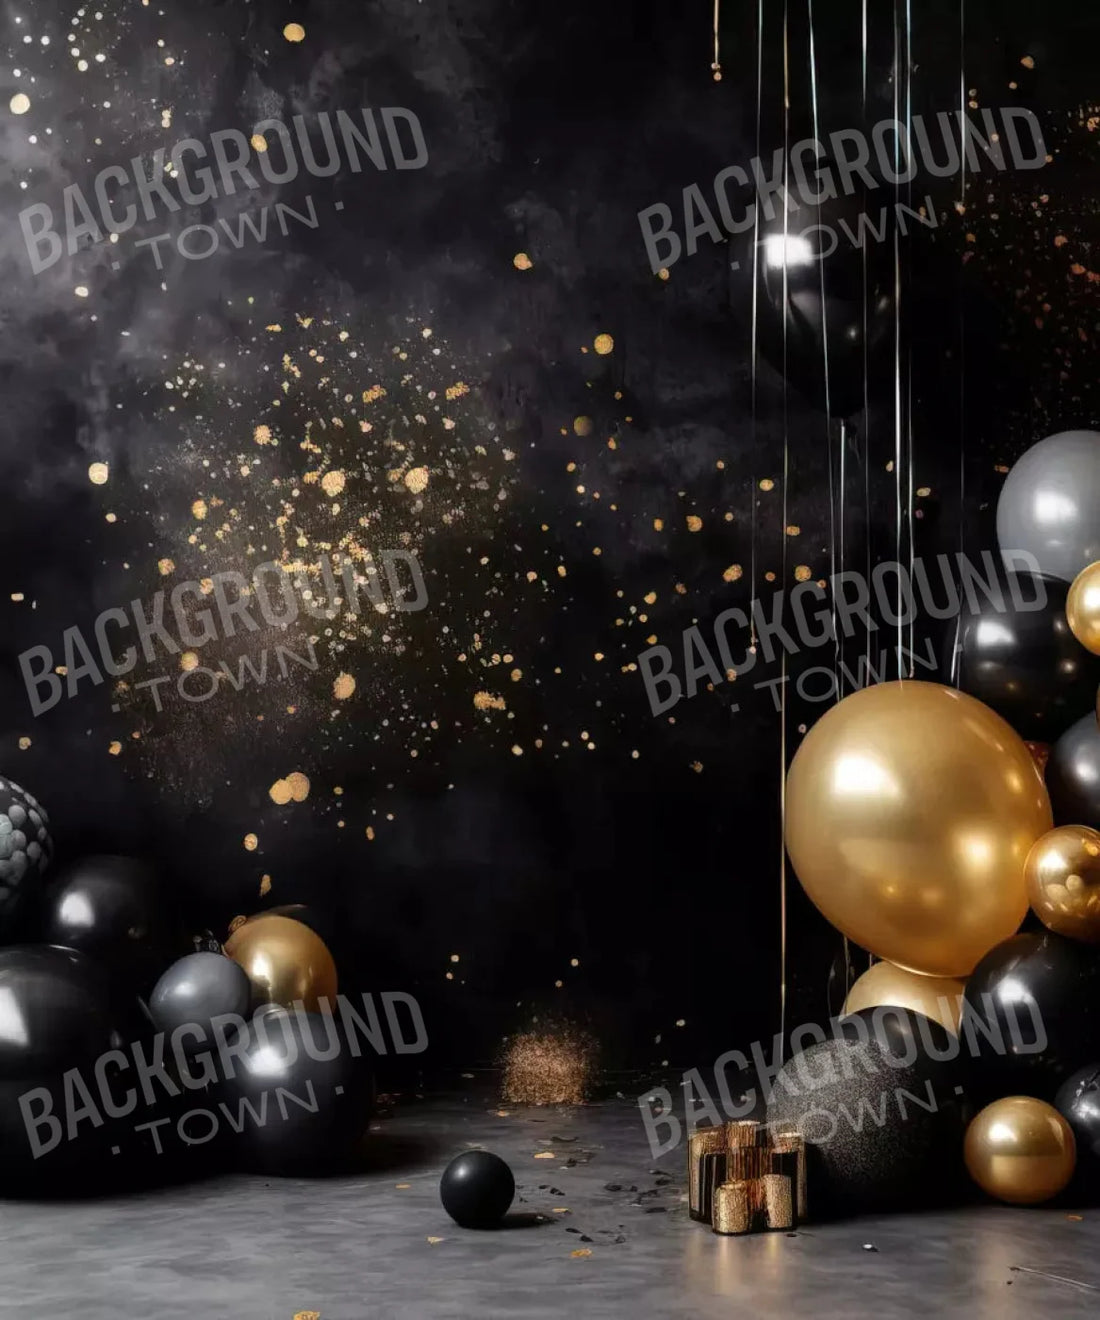 Black and Gold Party Balloons Backdrop for Photography